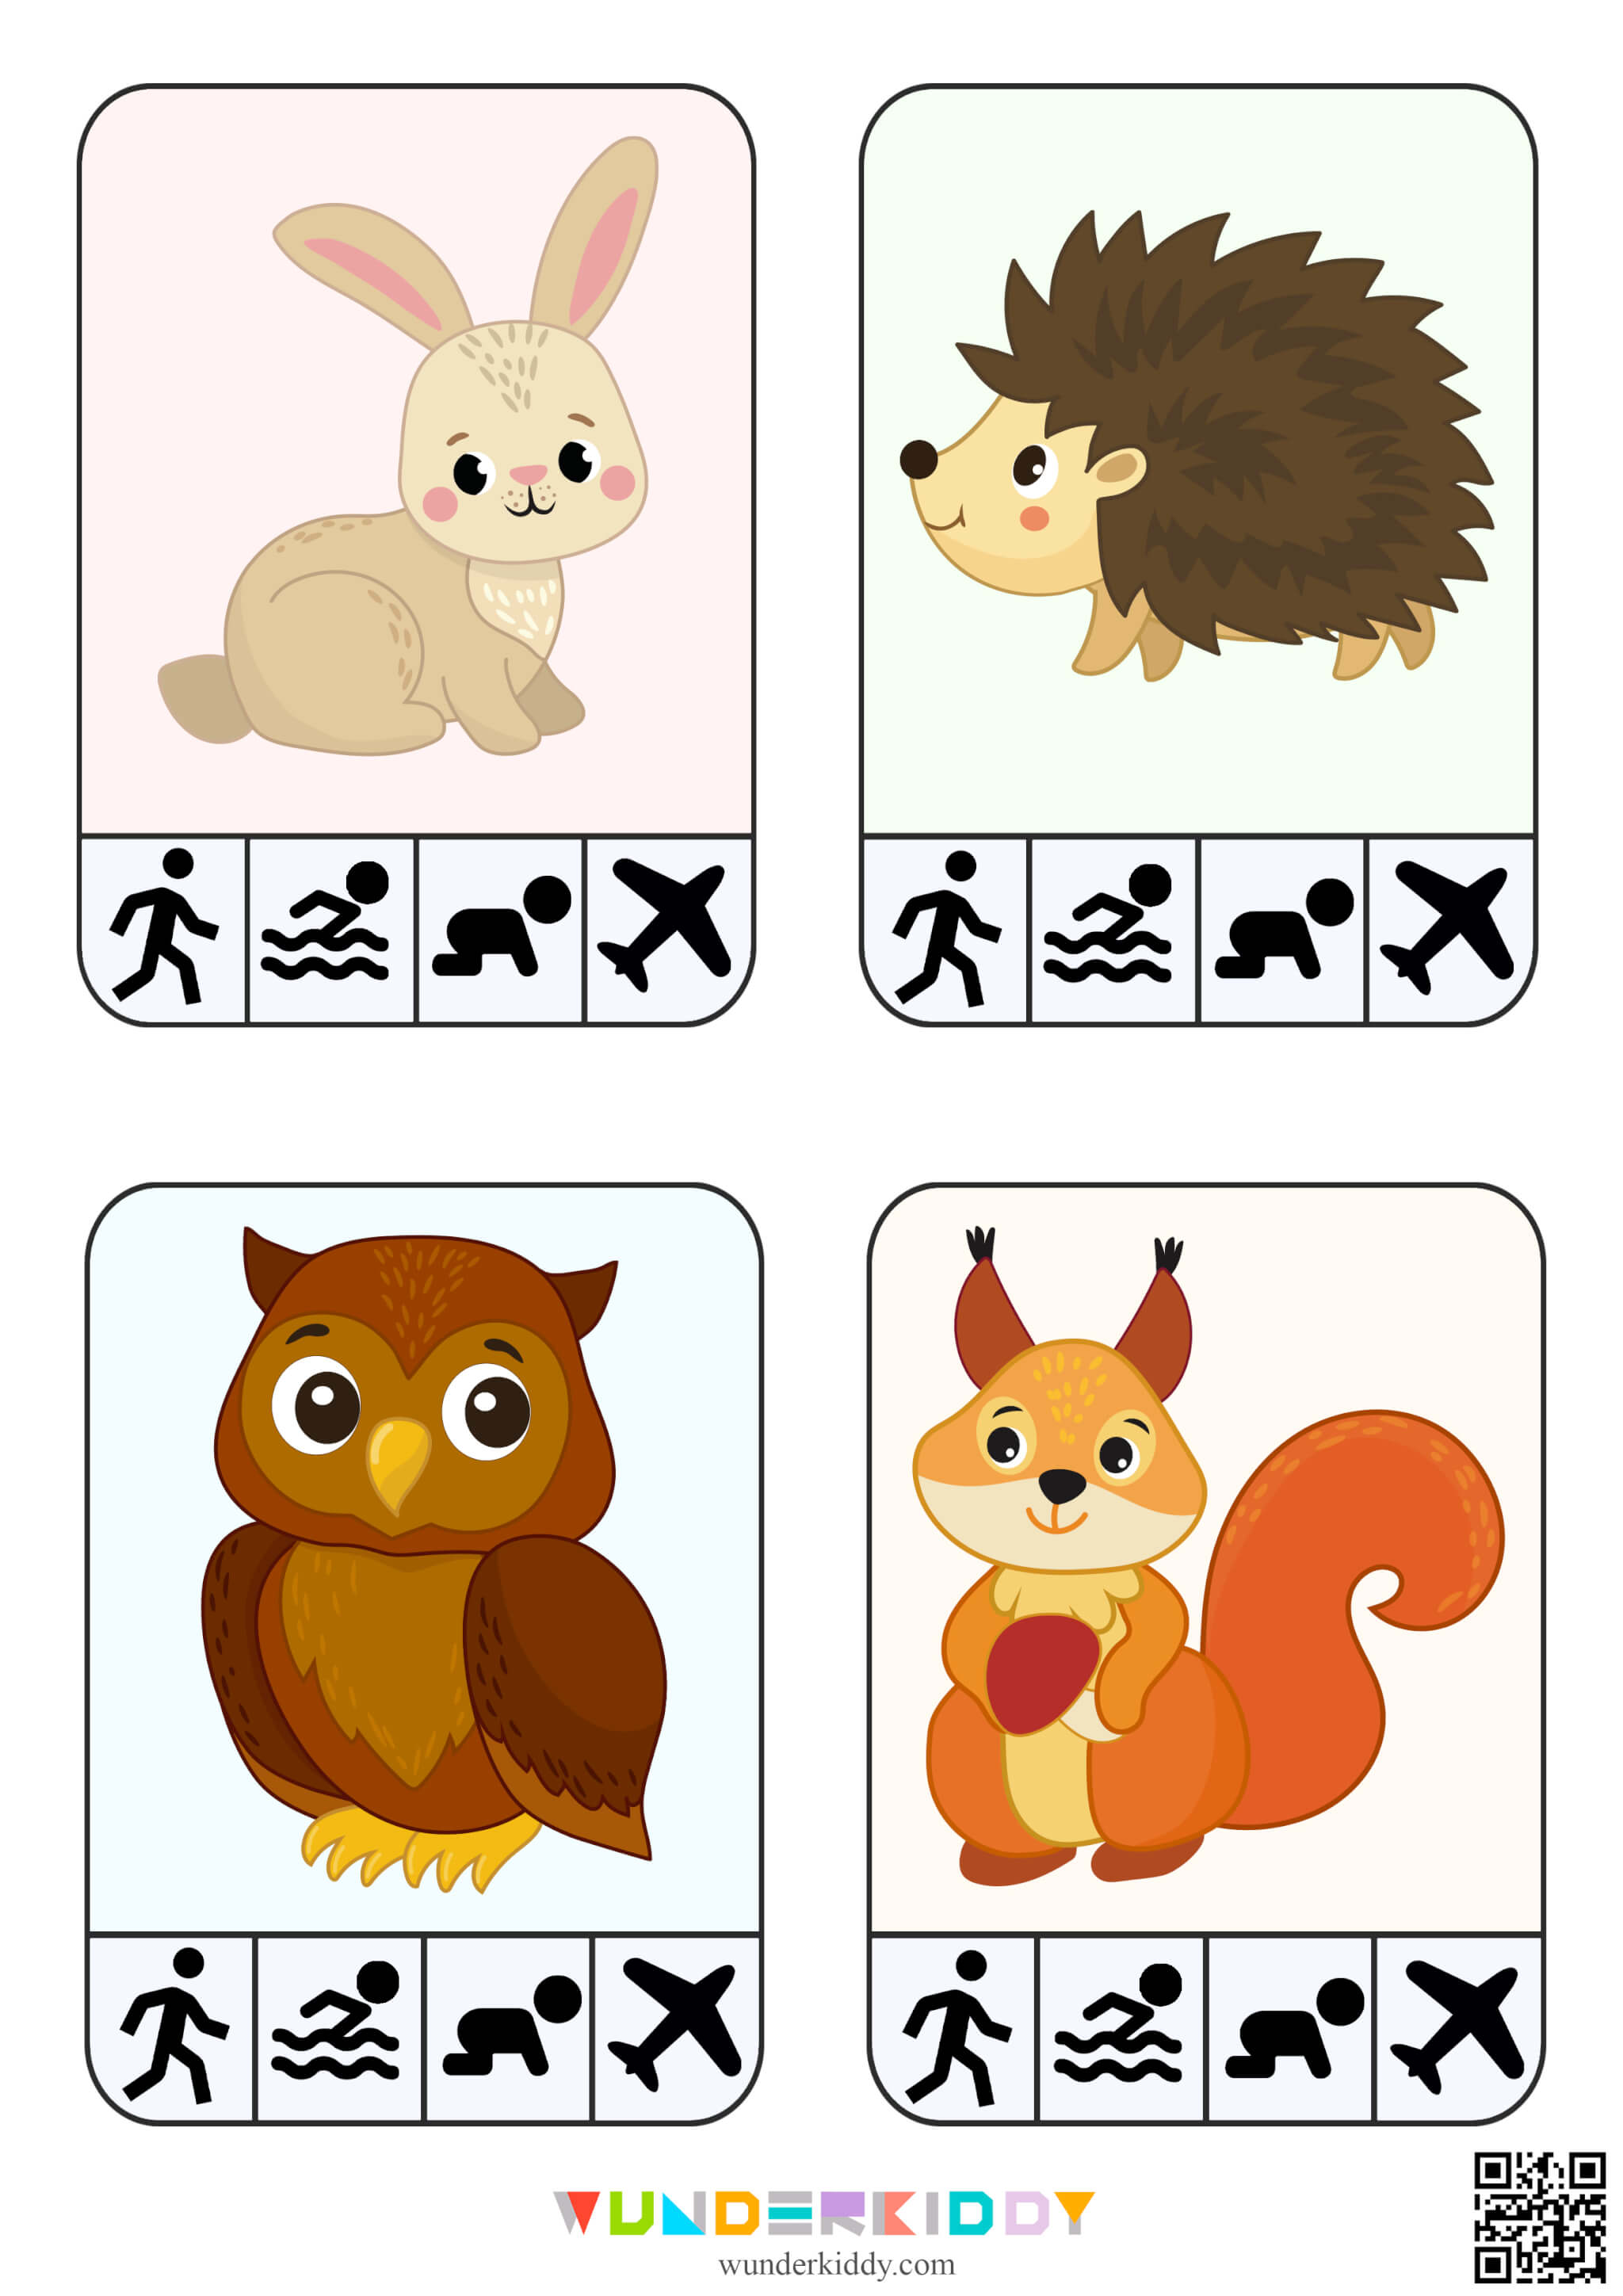 Animal Movements Activity for Kids - Image 6